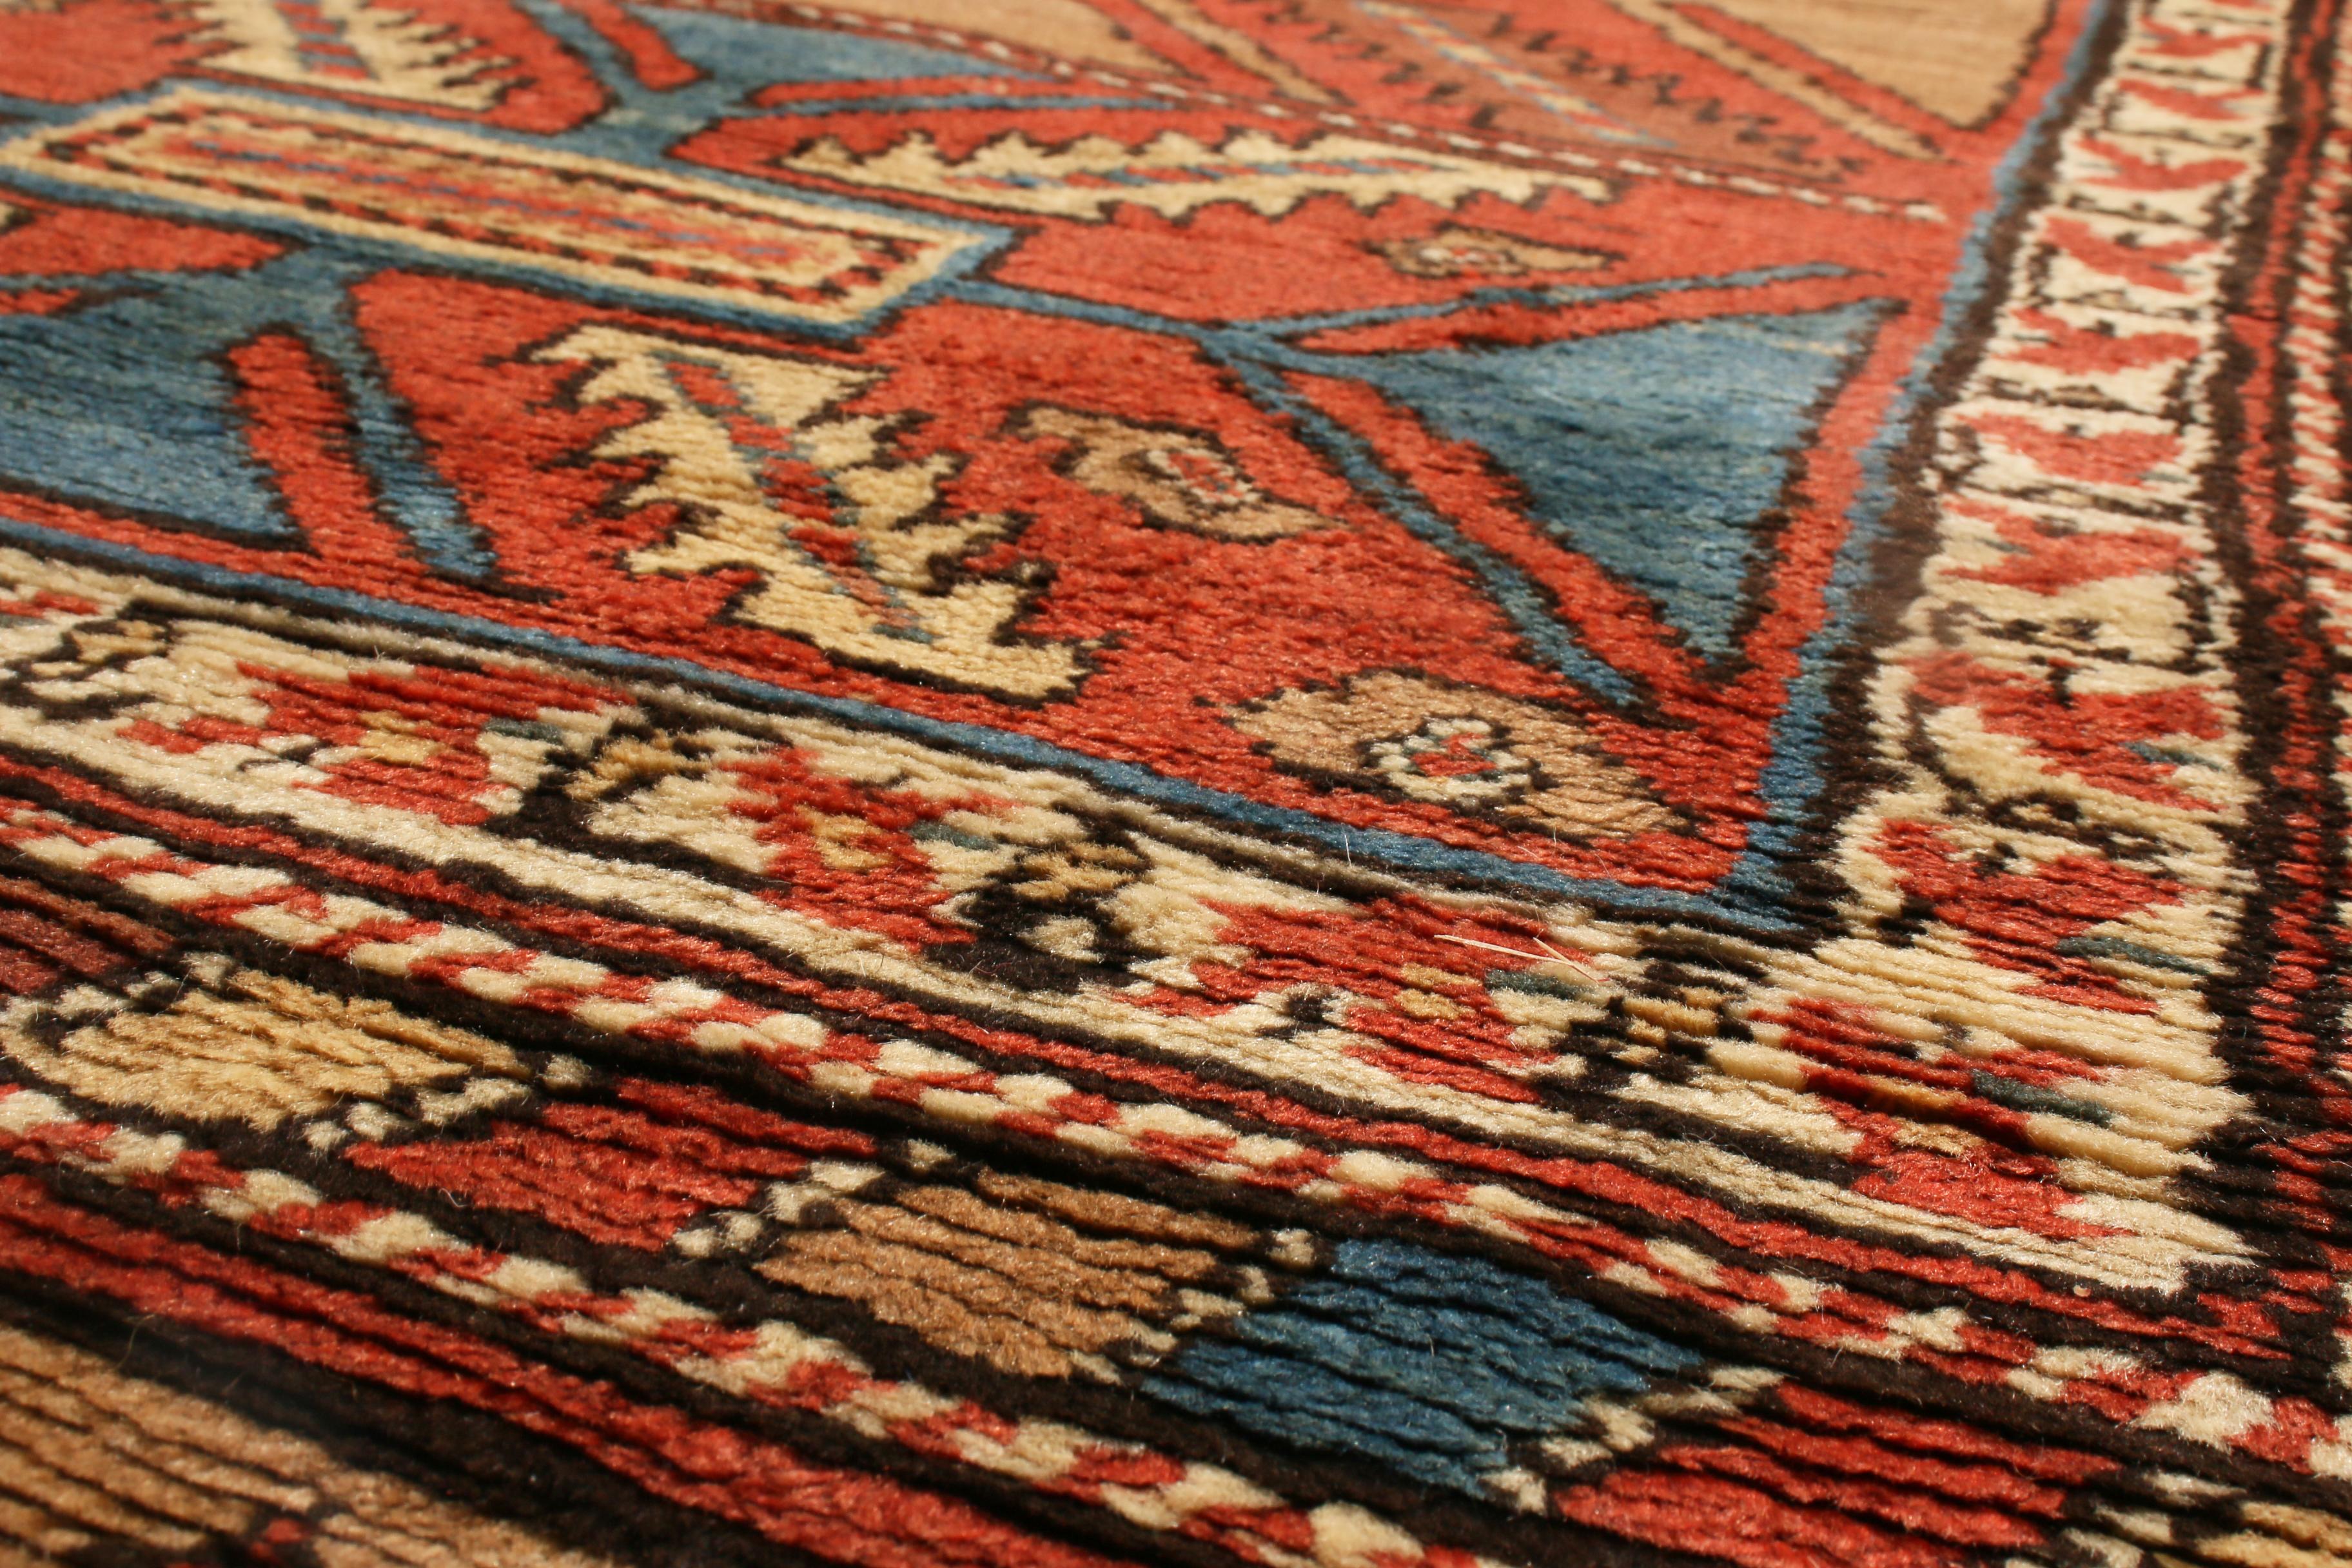 Antique Bakhshaish Red and Blue Geometric Wool Persian Runner by Rug & Kilim In Good Condition For Sale In Long Island City, NY